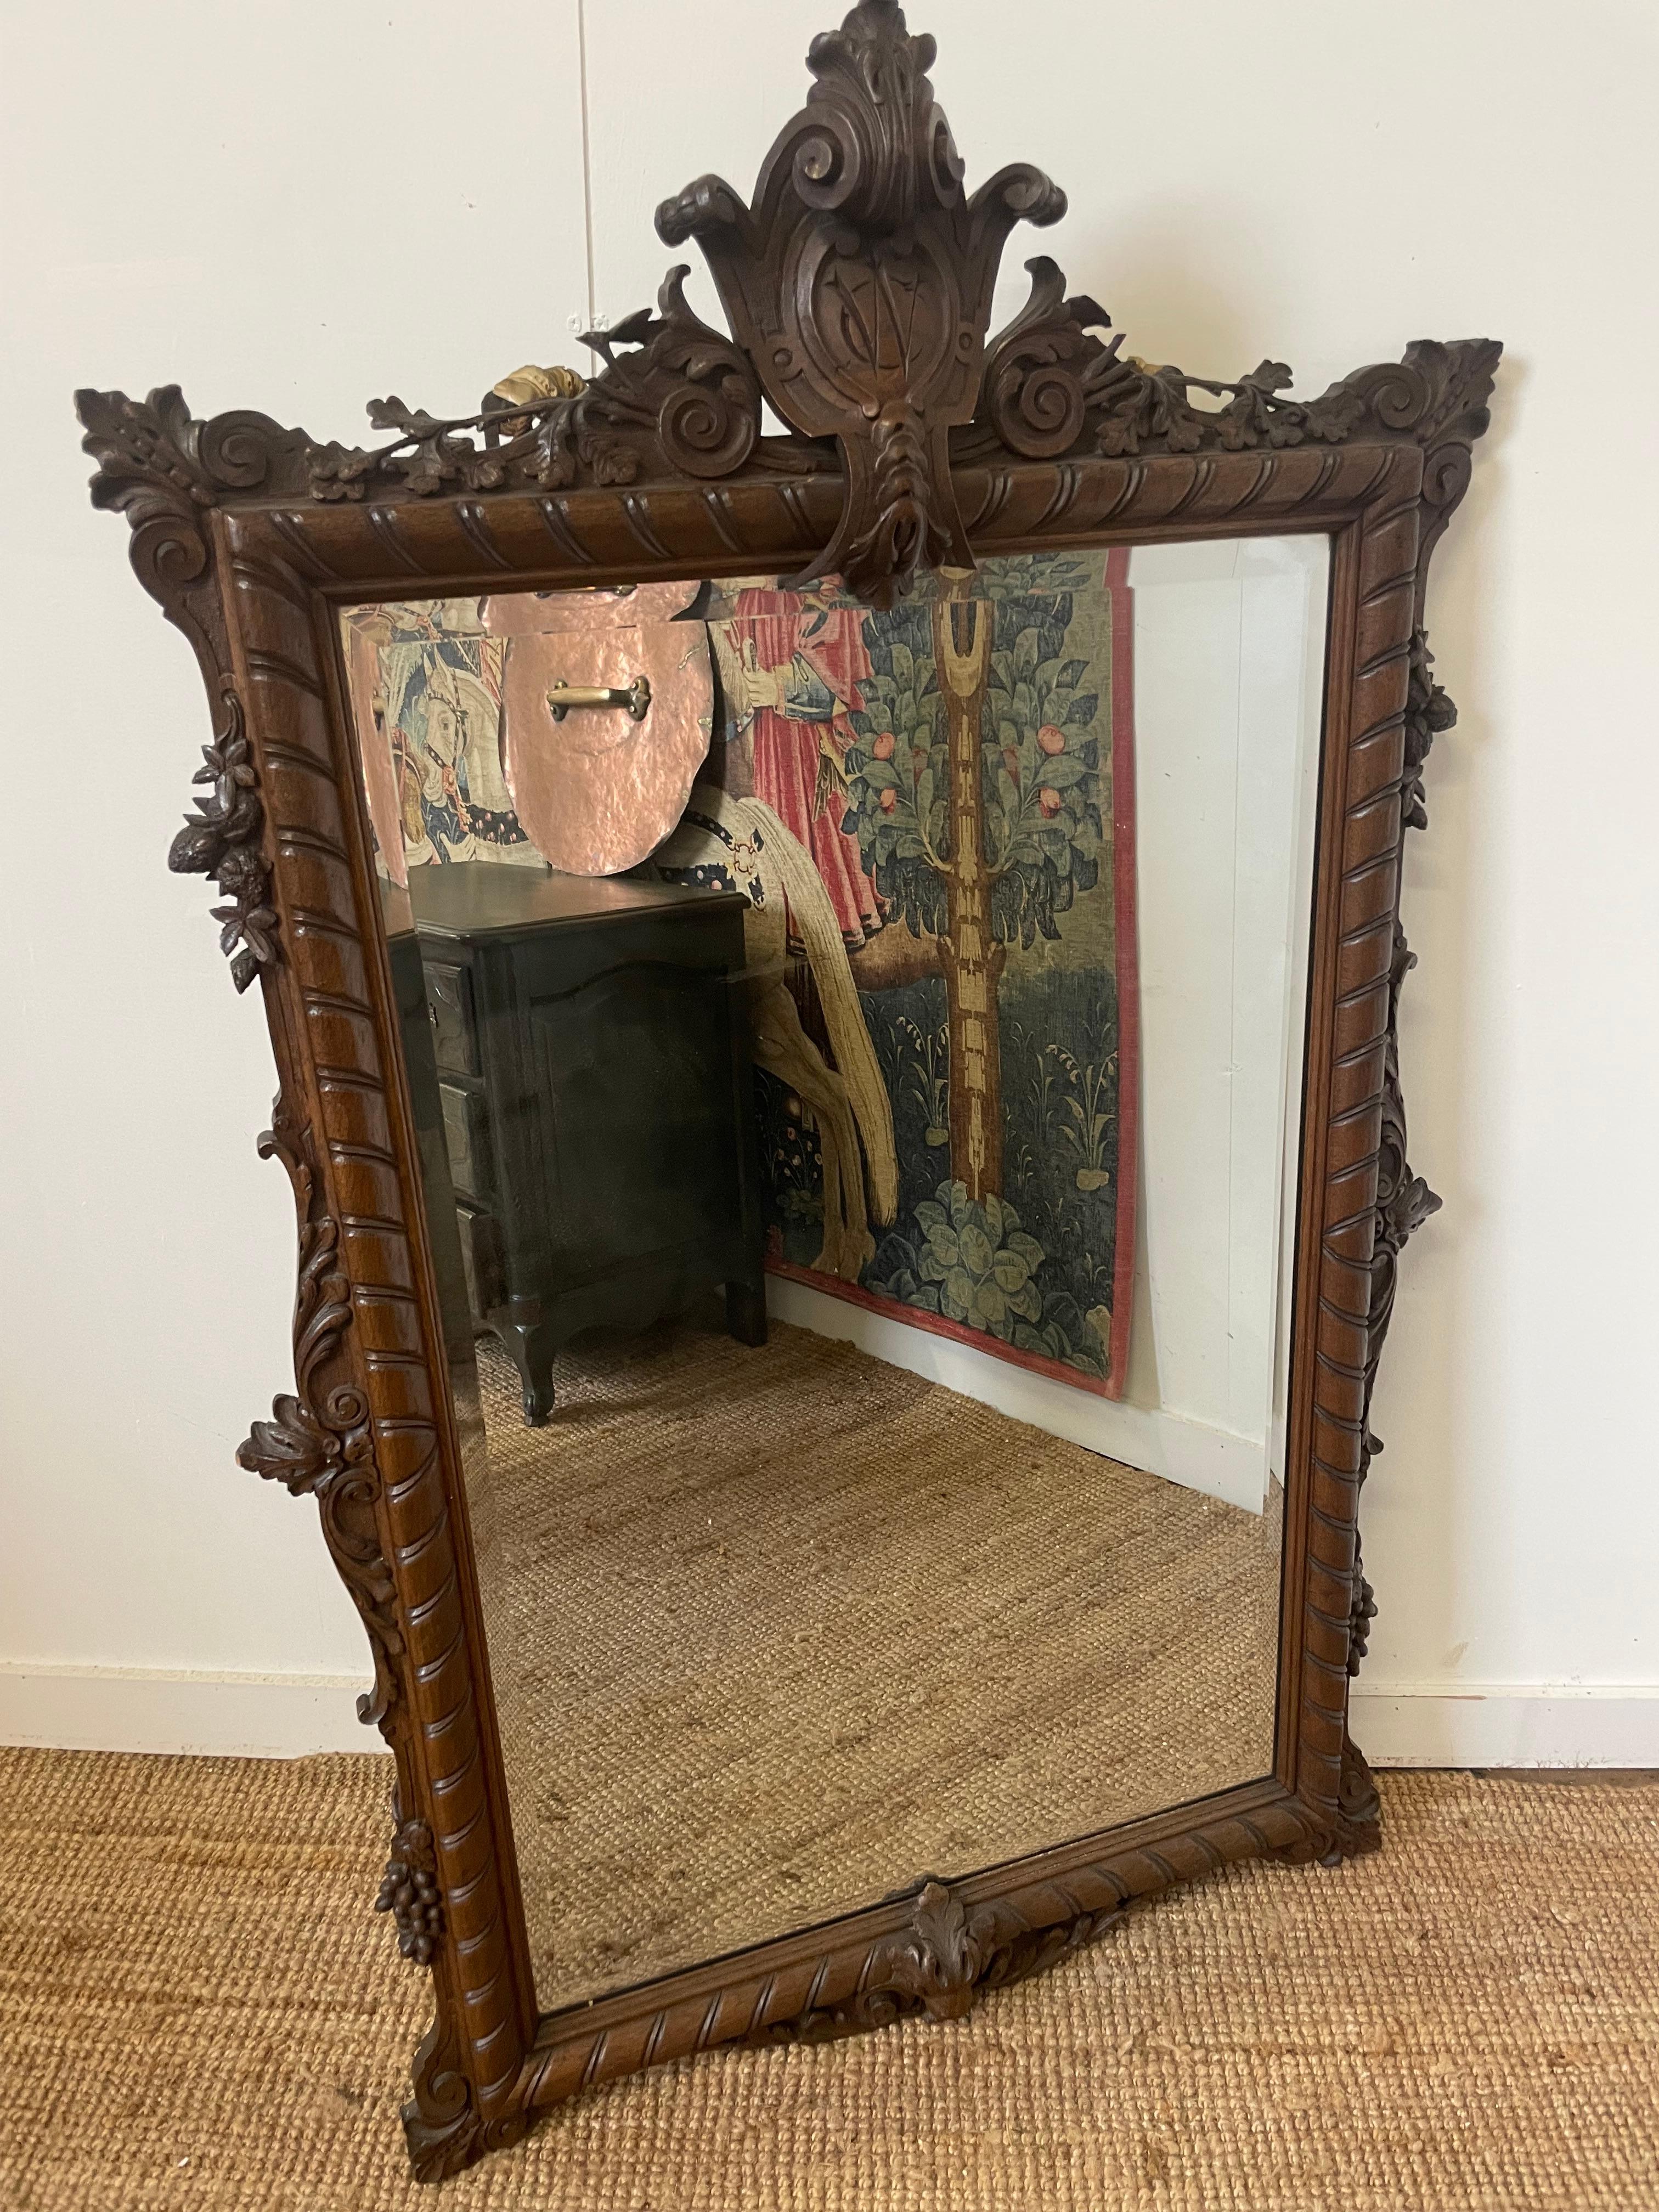 Very decorative large 19th century carved oak mirror
French circa 1860’s with original bevelled mirror and backboards
Few minor losses to the carving at the top
37 x 61.5 inches